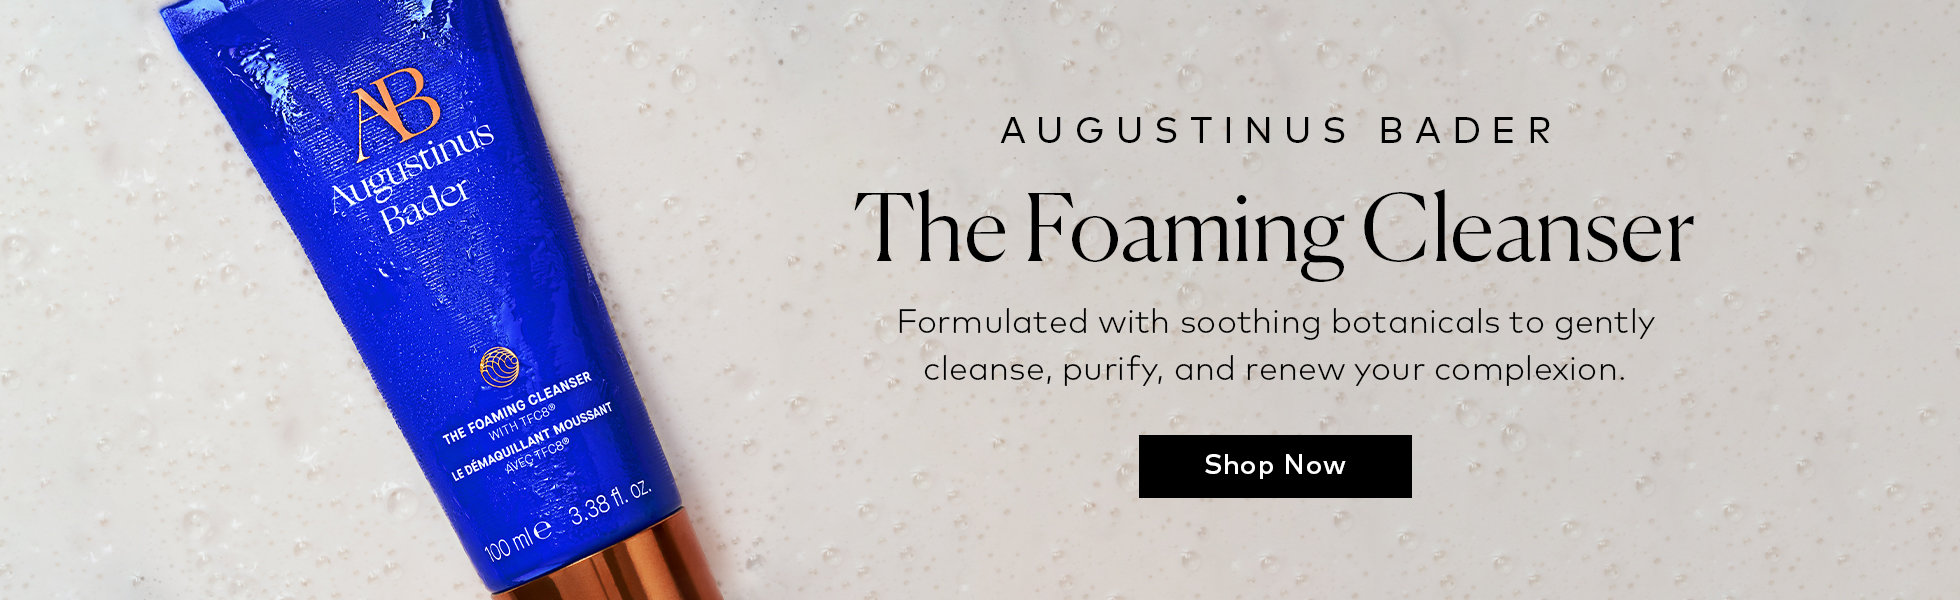 Shop the Augustinus Bader The Foaming Cleanser on Beautylish.com